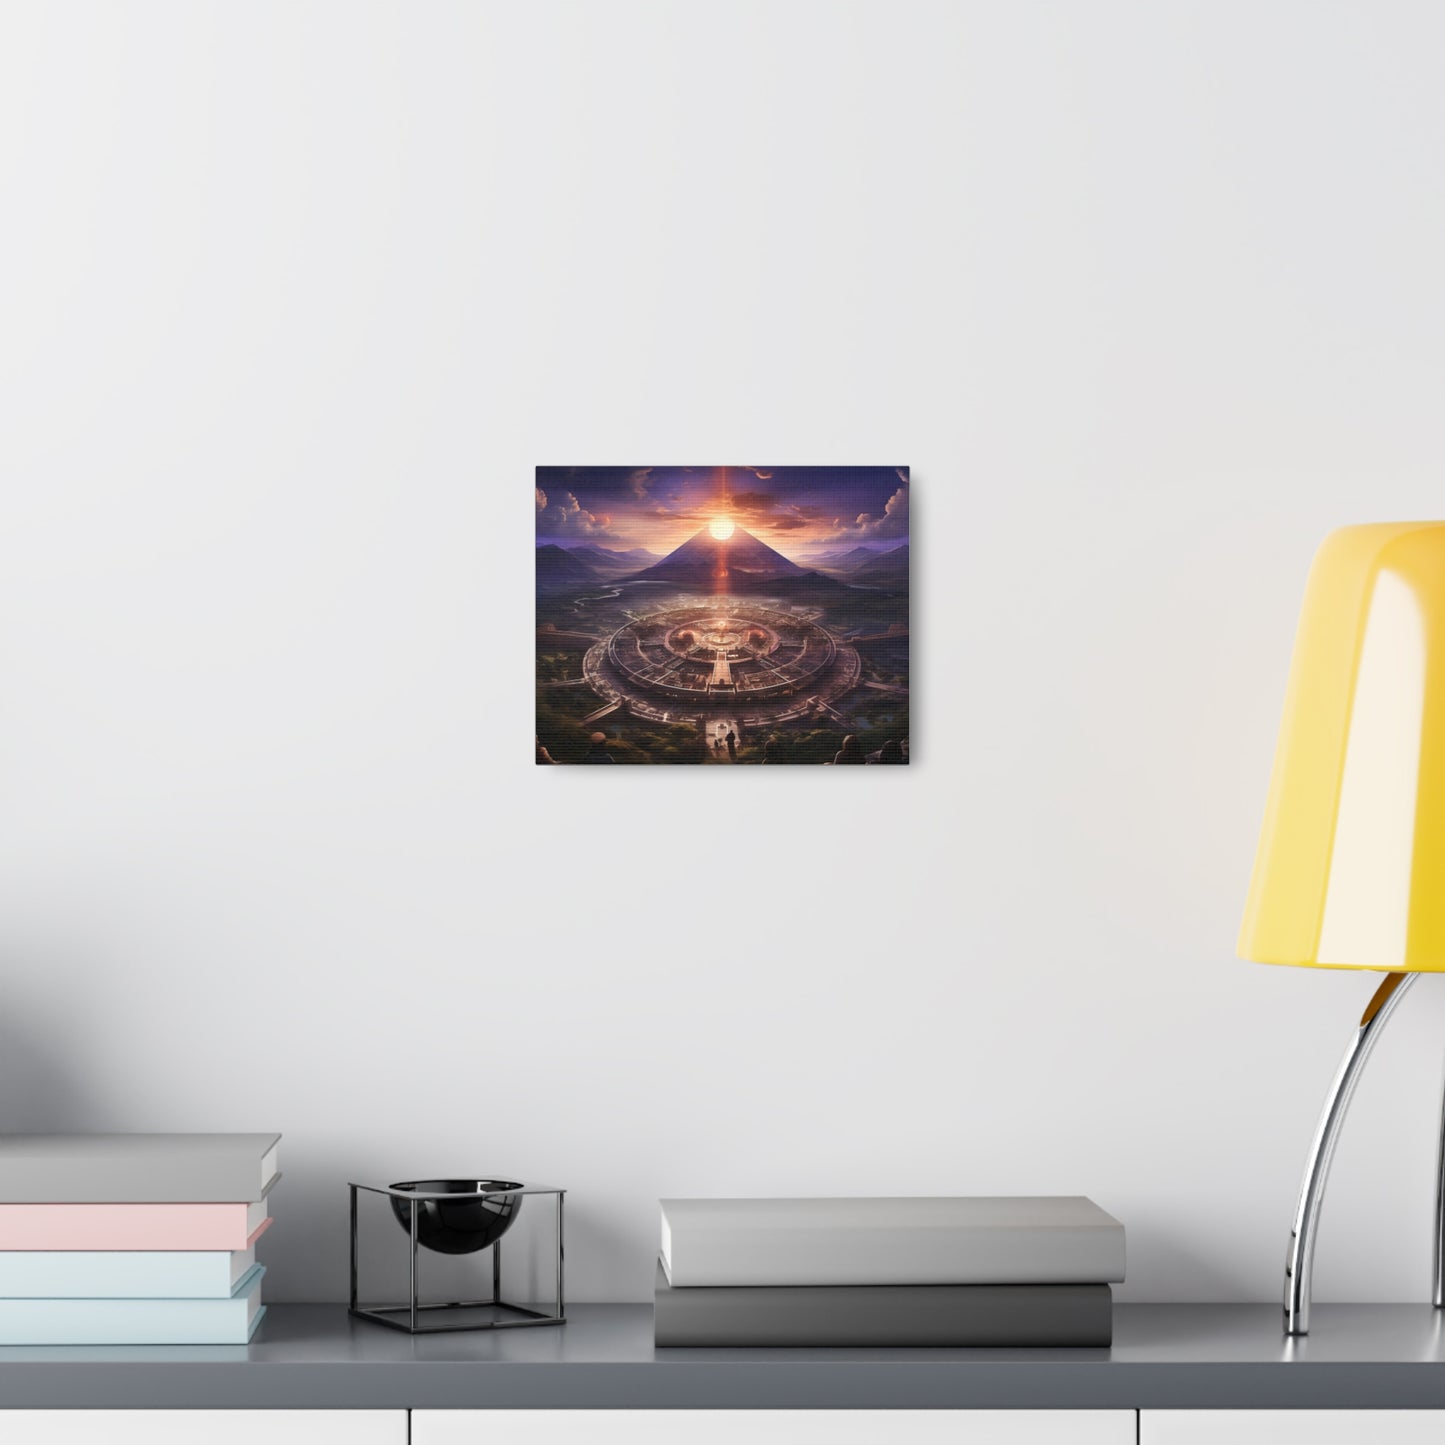 Ancient Mayan Temple With Mountain and Sunset Canvas Spiritual Decor